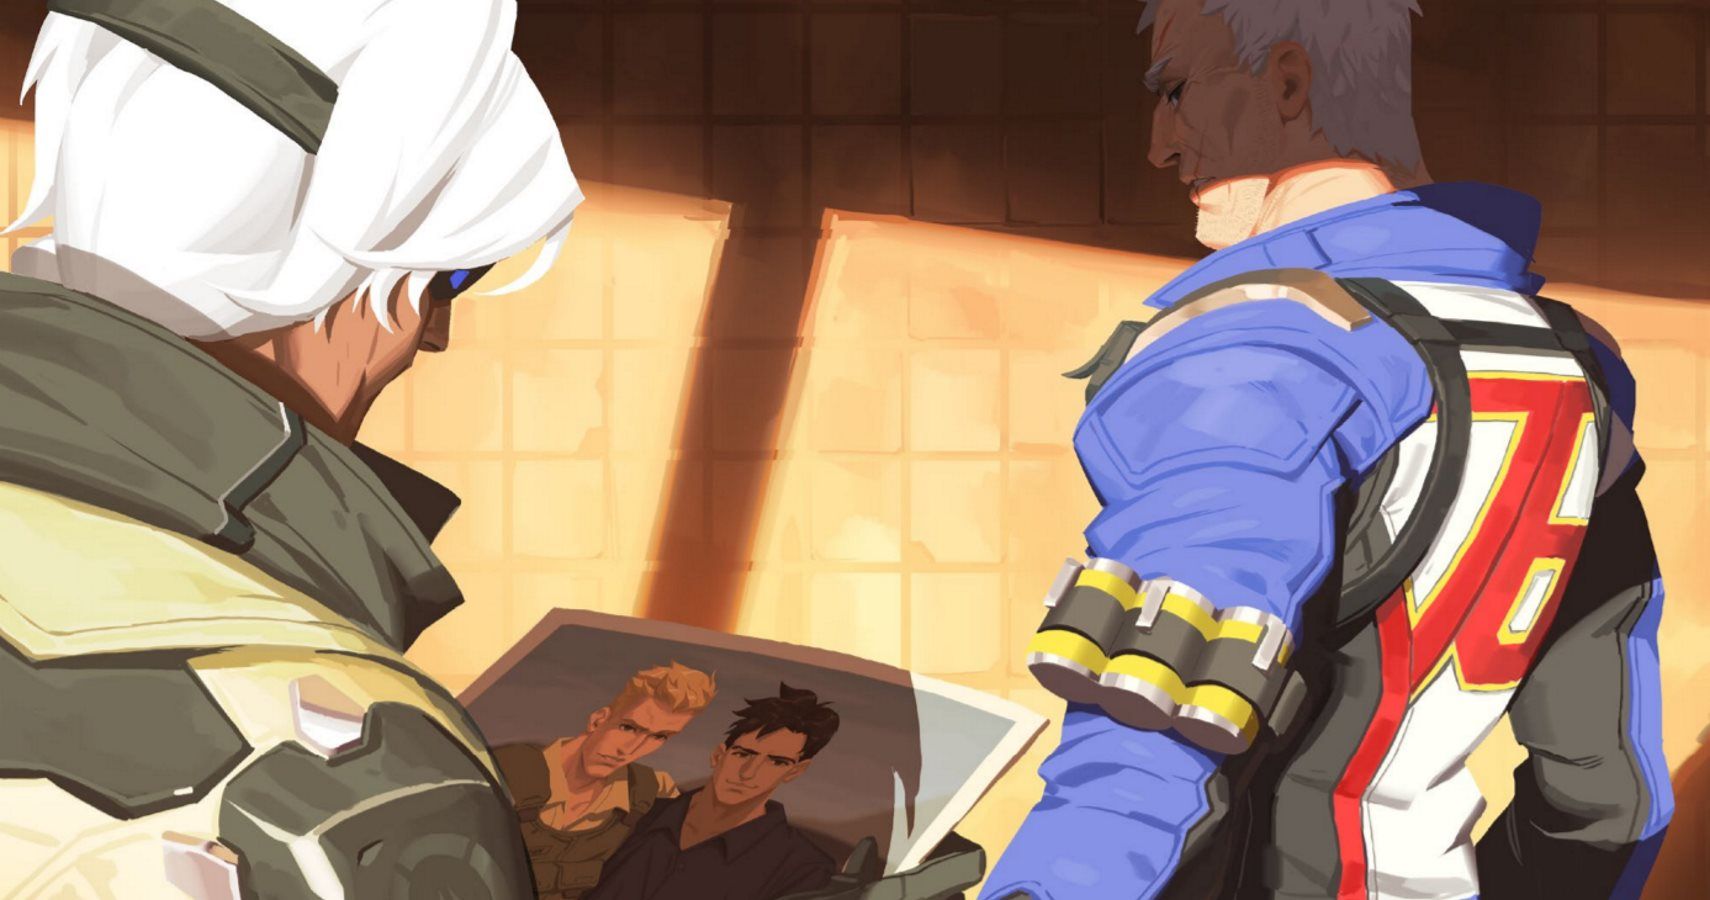 New Overwatch Lore Confirms Soldier 76 Is Gay And Chose His Mission Over His Relationship